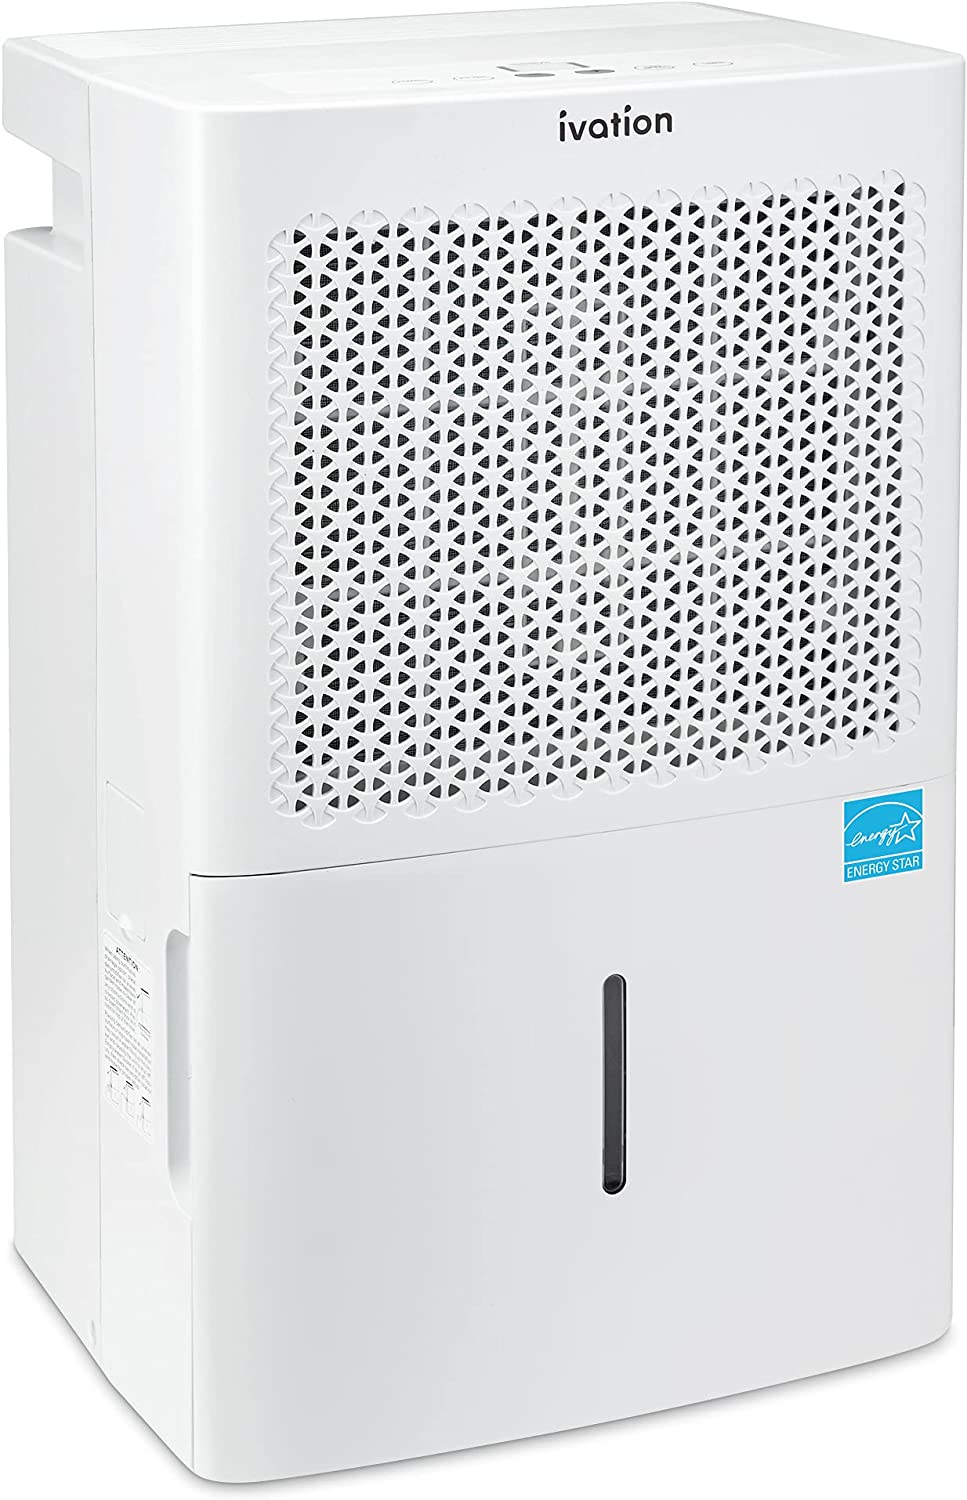 Ivation 4,500 Sq. Ft Energy Star Dehumidifier with Continuous Drain Hose Connector